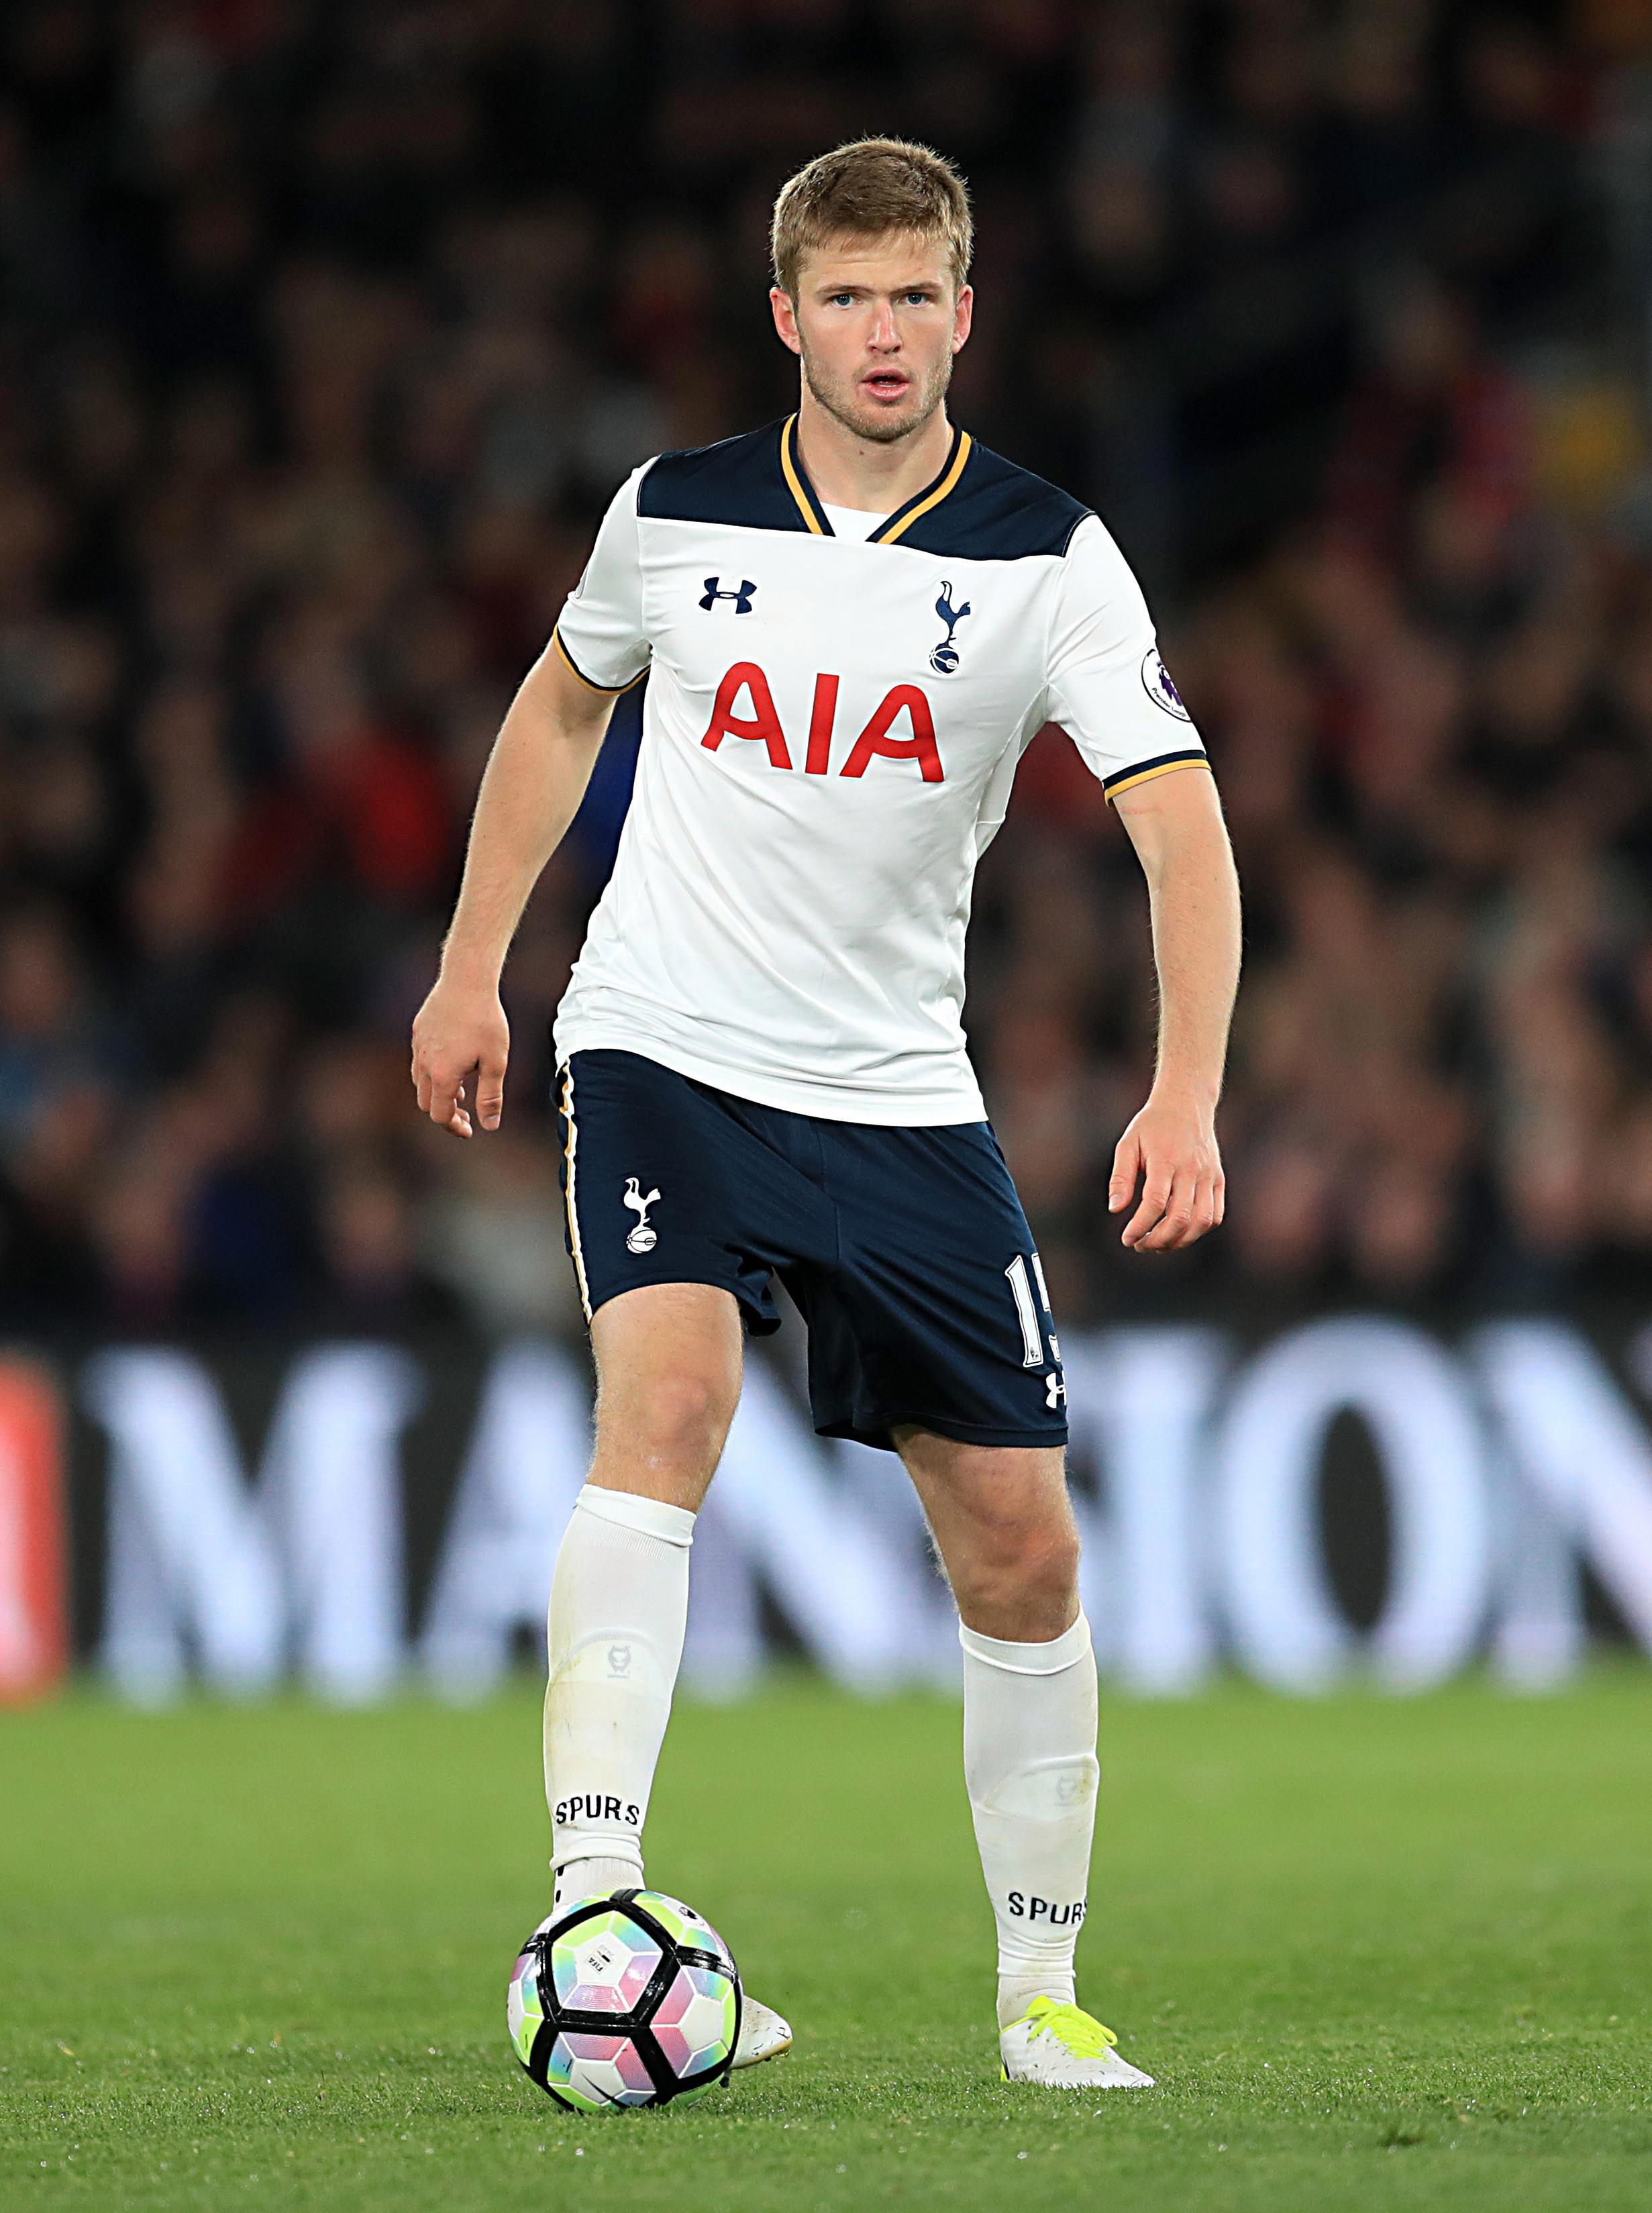 Manchester United transfer news: Eric Dier remains Jose Mourinho's No 1 target despite Tottenham insisting none of their top stars are